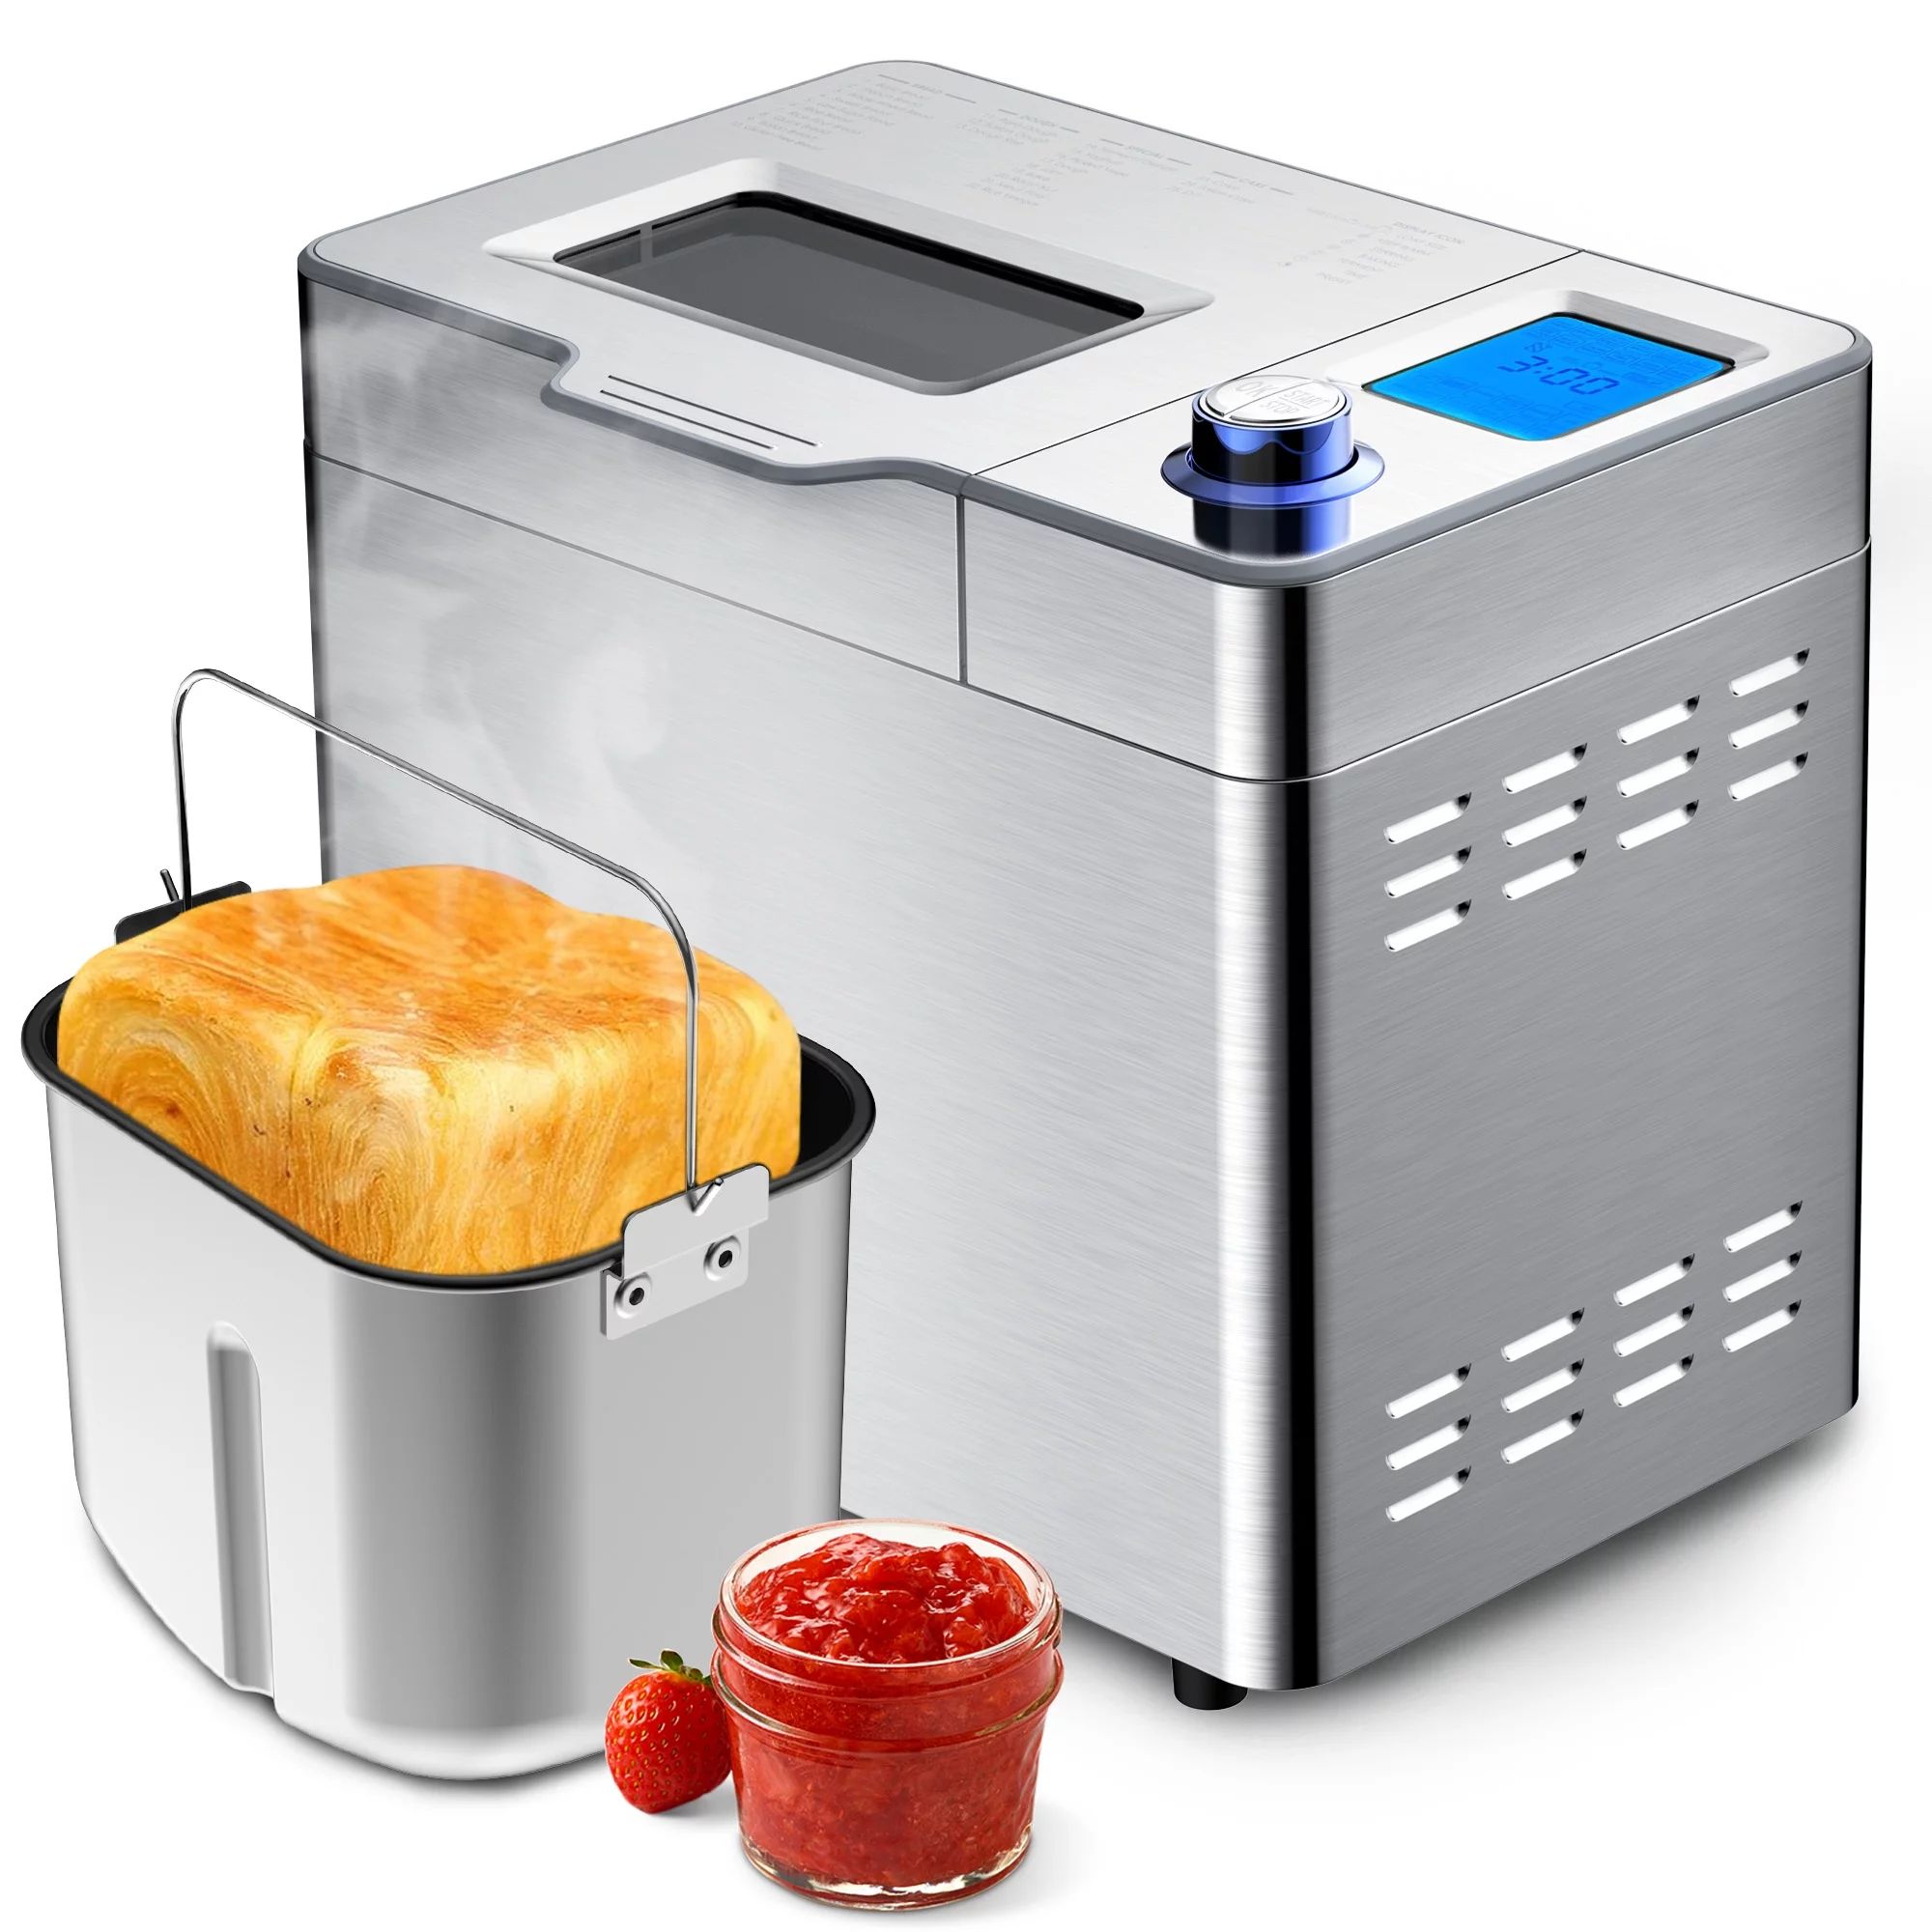 VAVSEA 25 in 1 Stainless Steel Bread Maker, 2LB Dough & Bread Maker Machine with Auto Fruit and N... | Walmart (US)